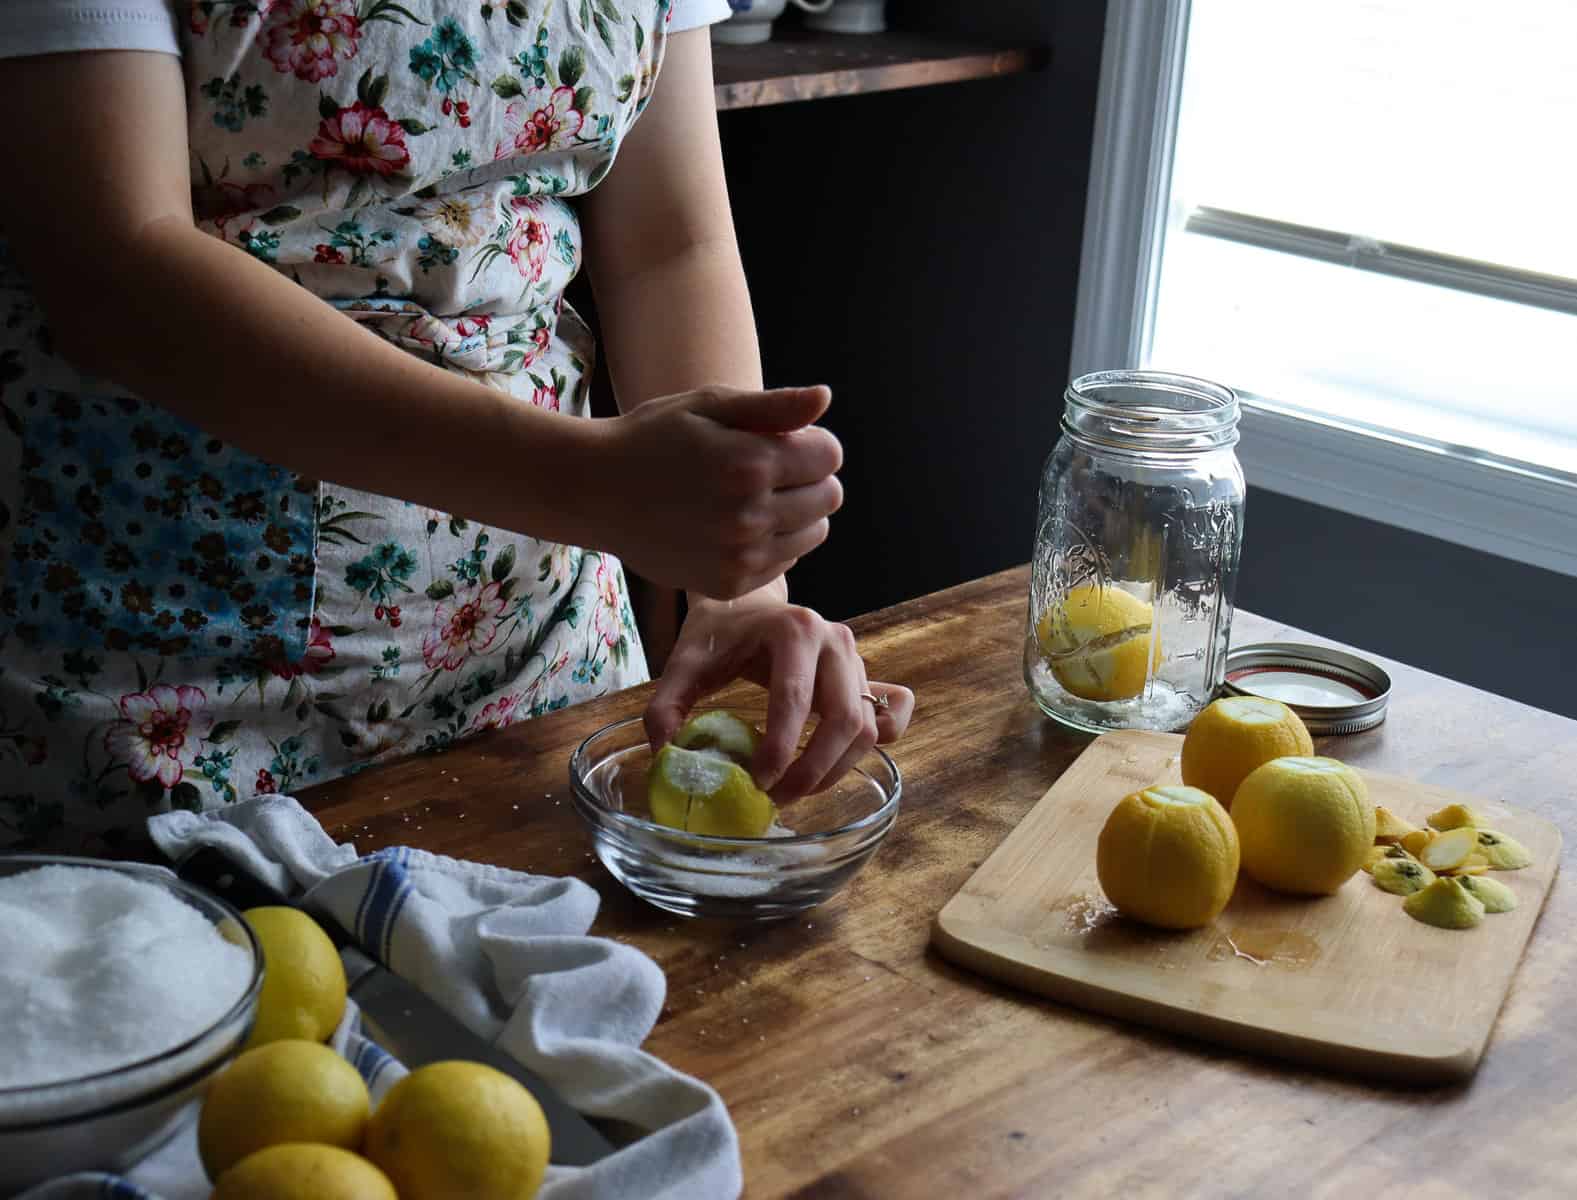 packing the lemons with salt